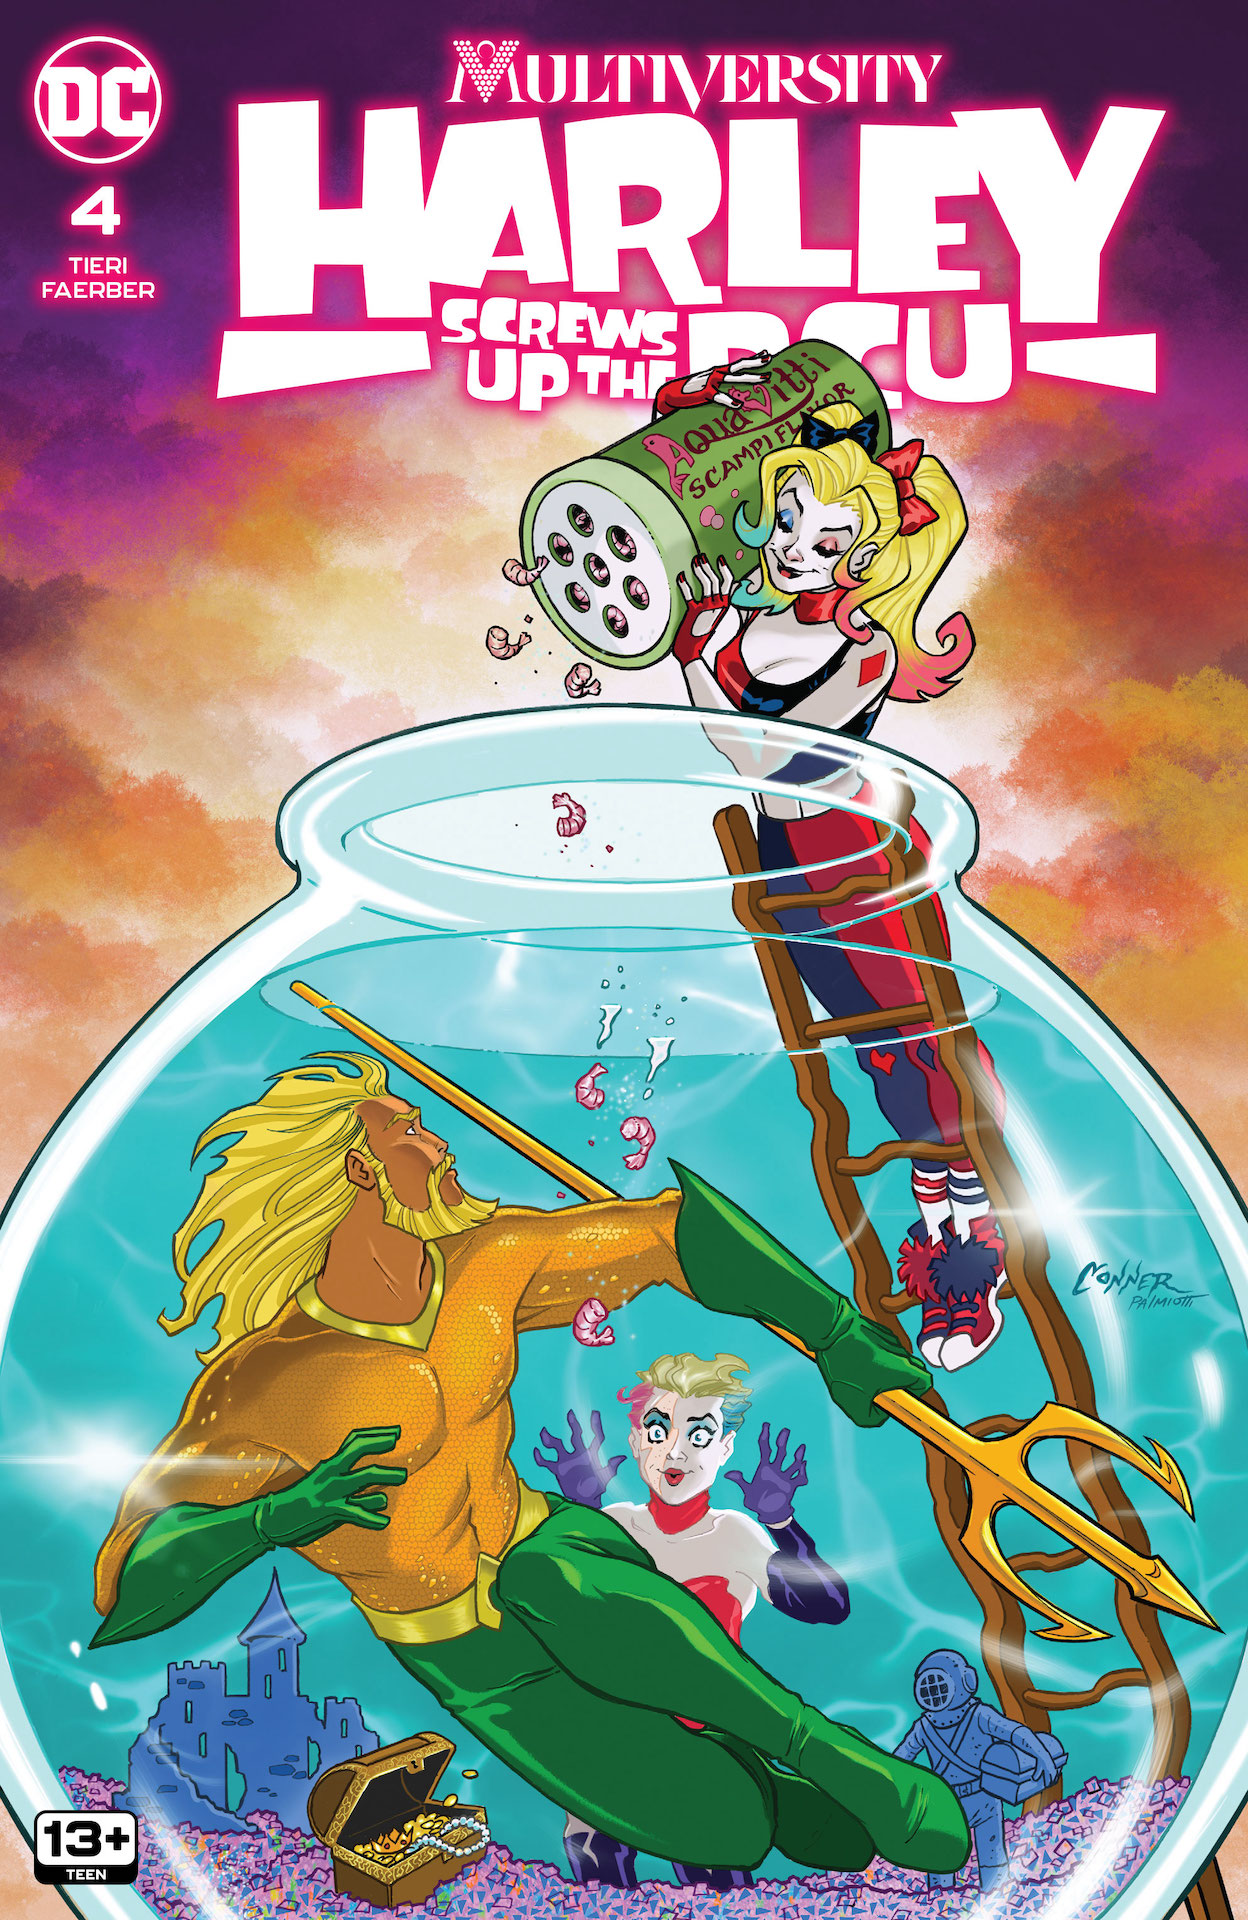 DC Preview: Multiversity: Harley Screws Up the DCU #4